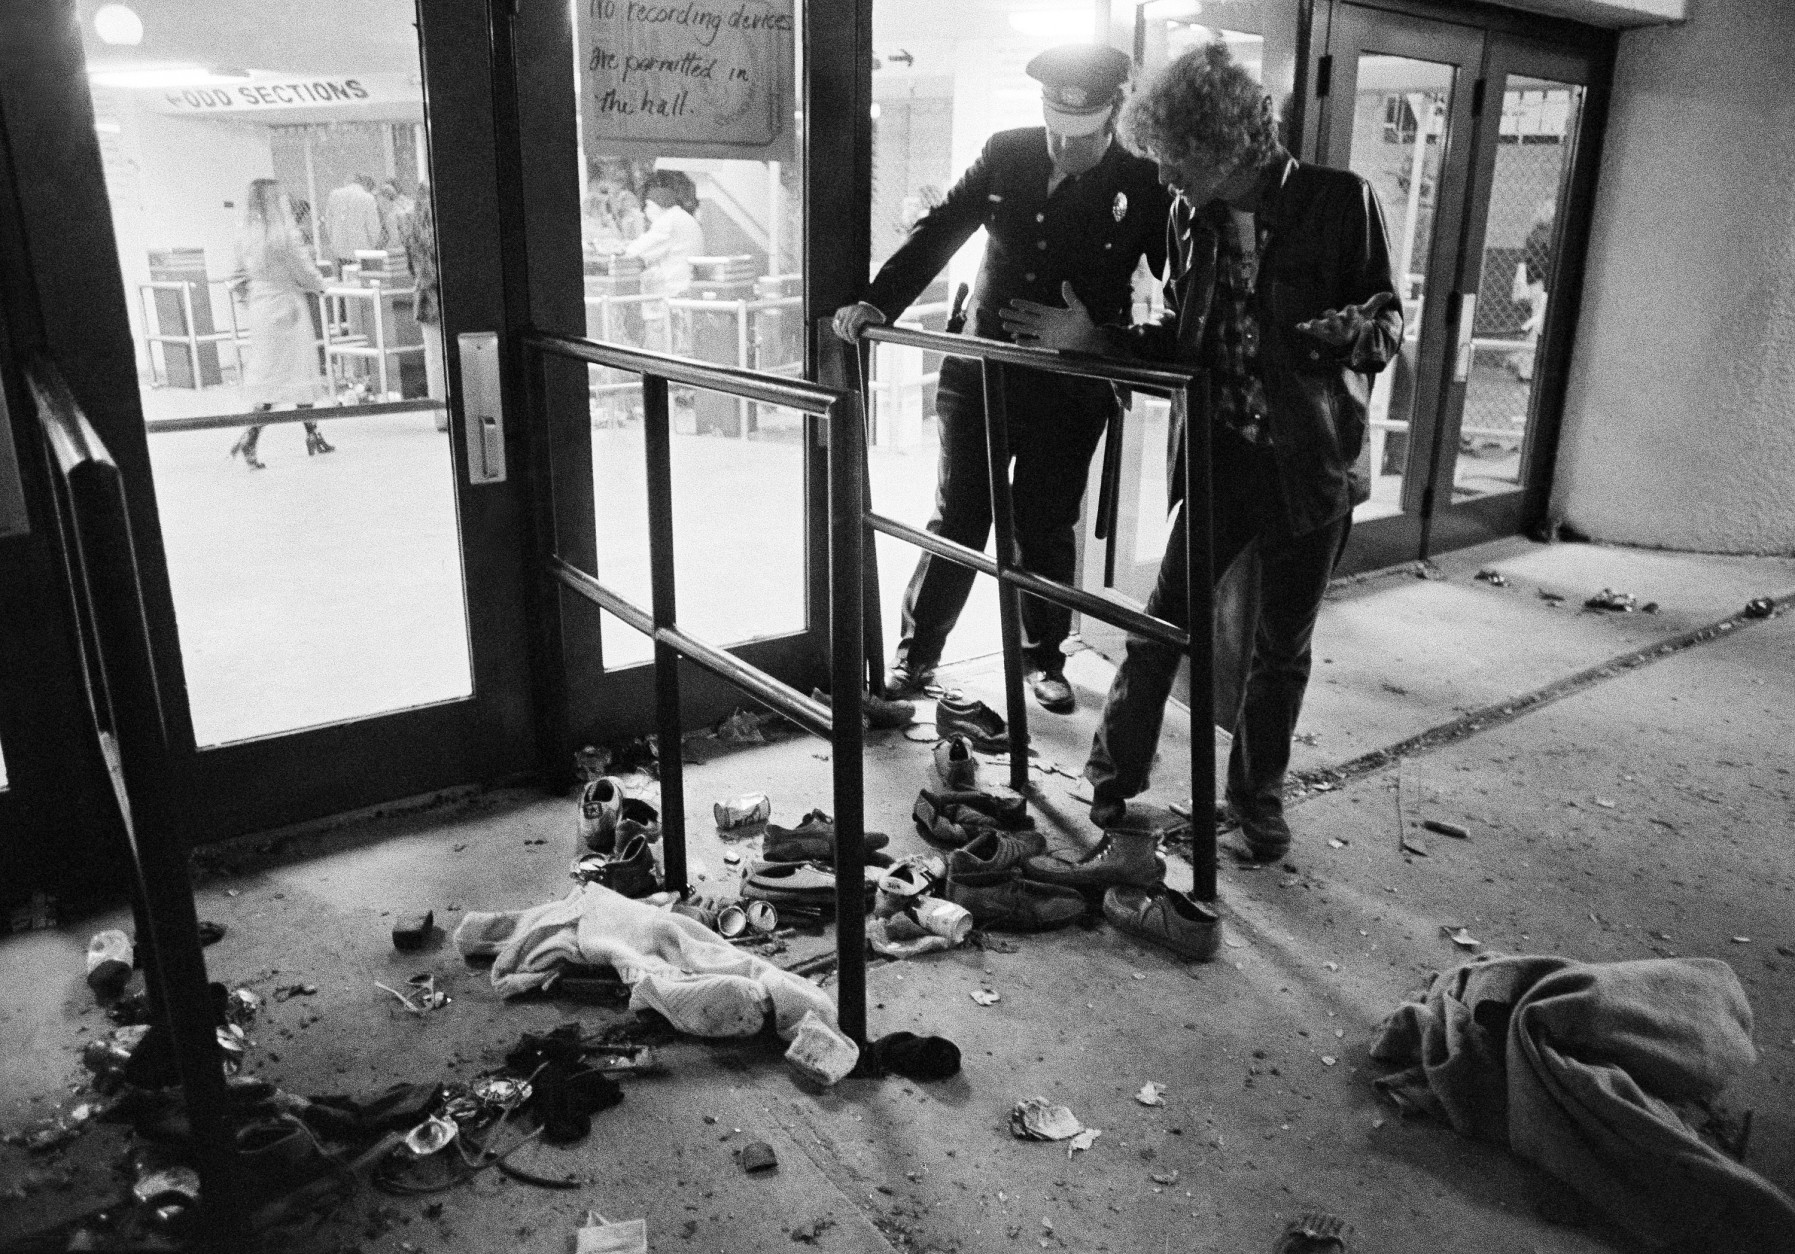 A security guard and an unidentified man look at an area where several people were killed as they were caught in a surging crowd entering Cincinnati's Riverfront Coliseum for a Who concert on Monday. Shoes and clothes were strewn around the area where the people were killed and injured, shown Dec. 4, 1979. (AP Photo/Brian Horton)